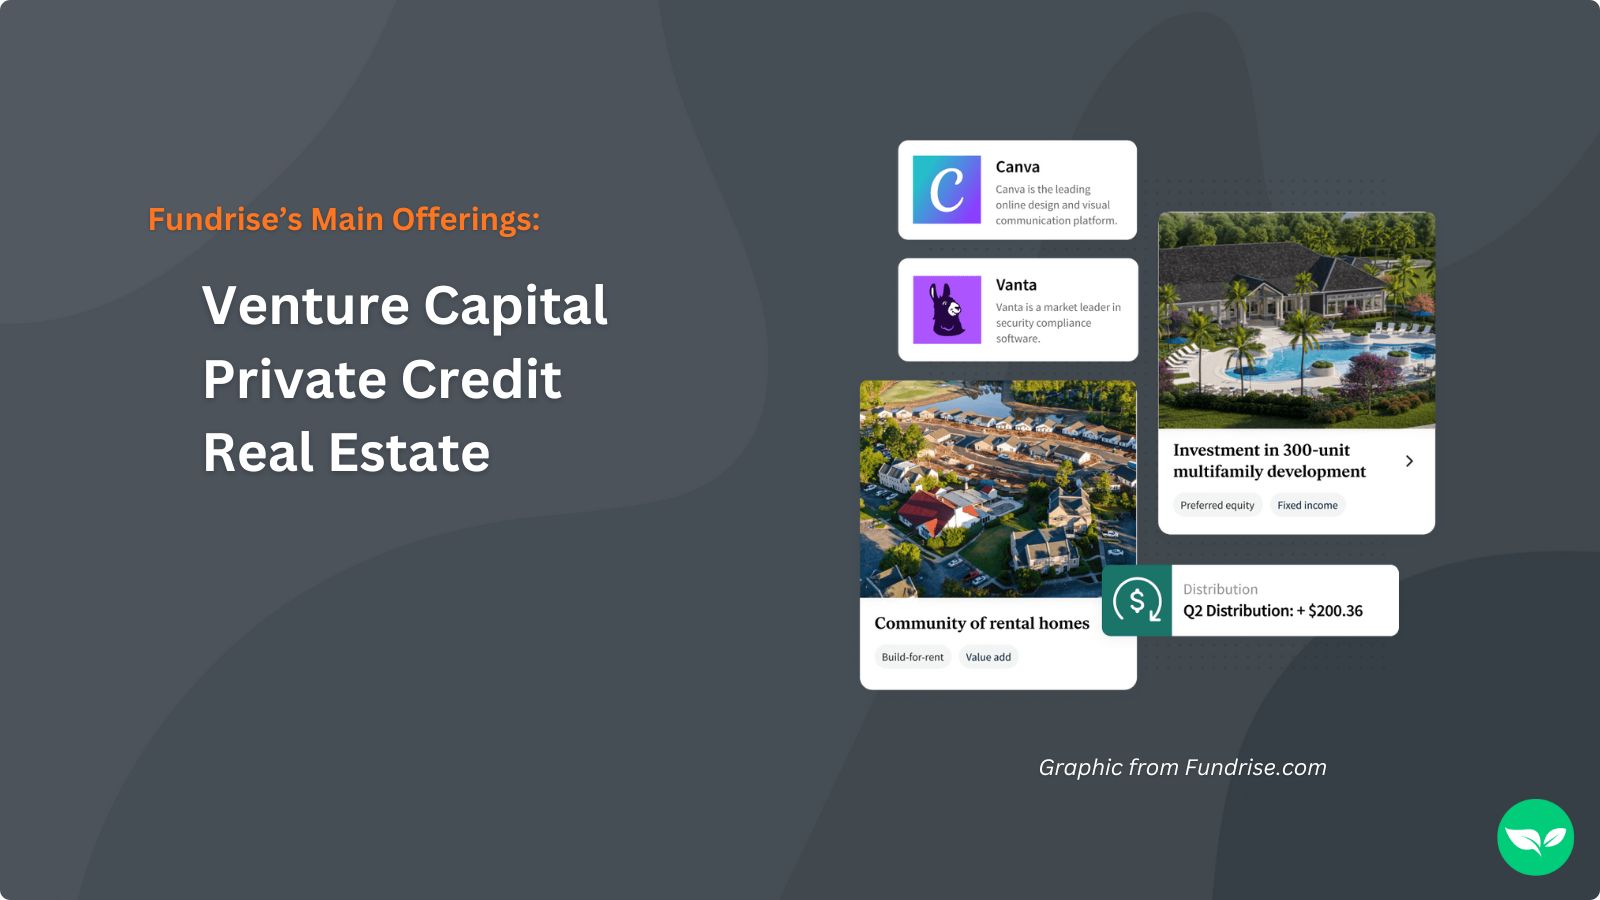 A graphic showing Fundrise's three main offerings: Venture Capital, Private Credit, and Real Estate